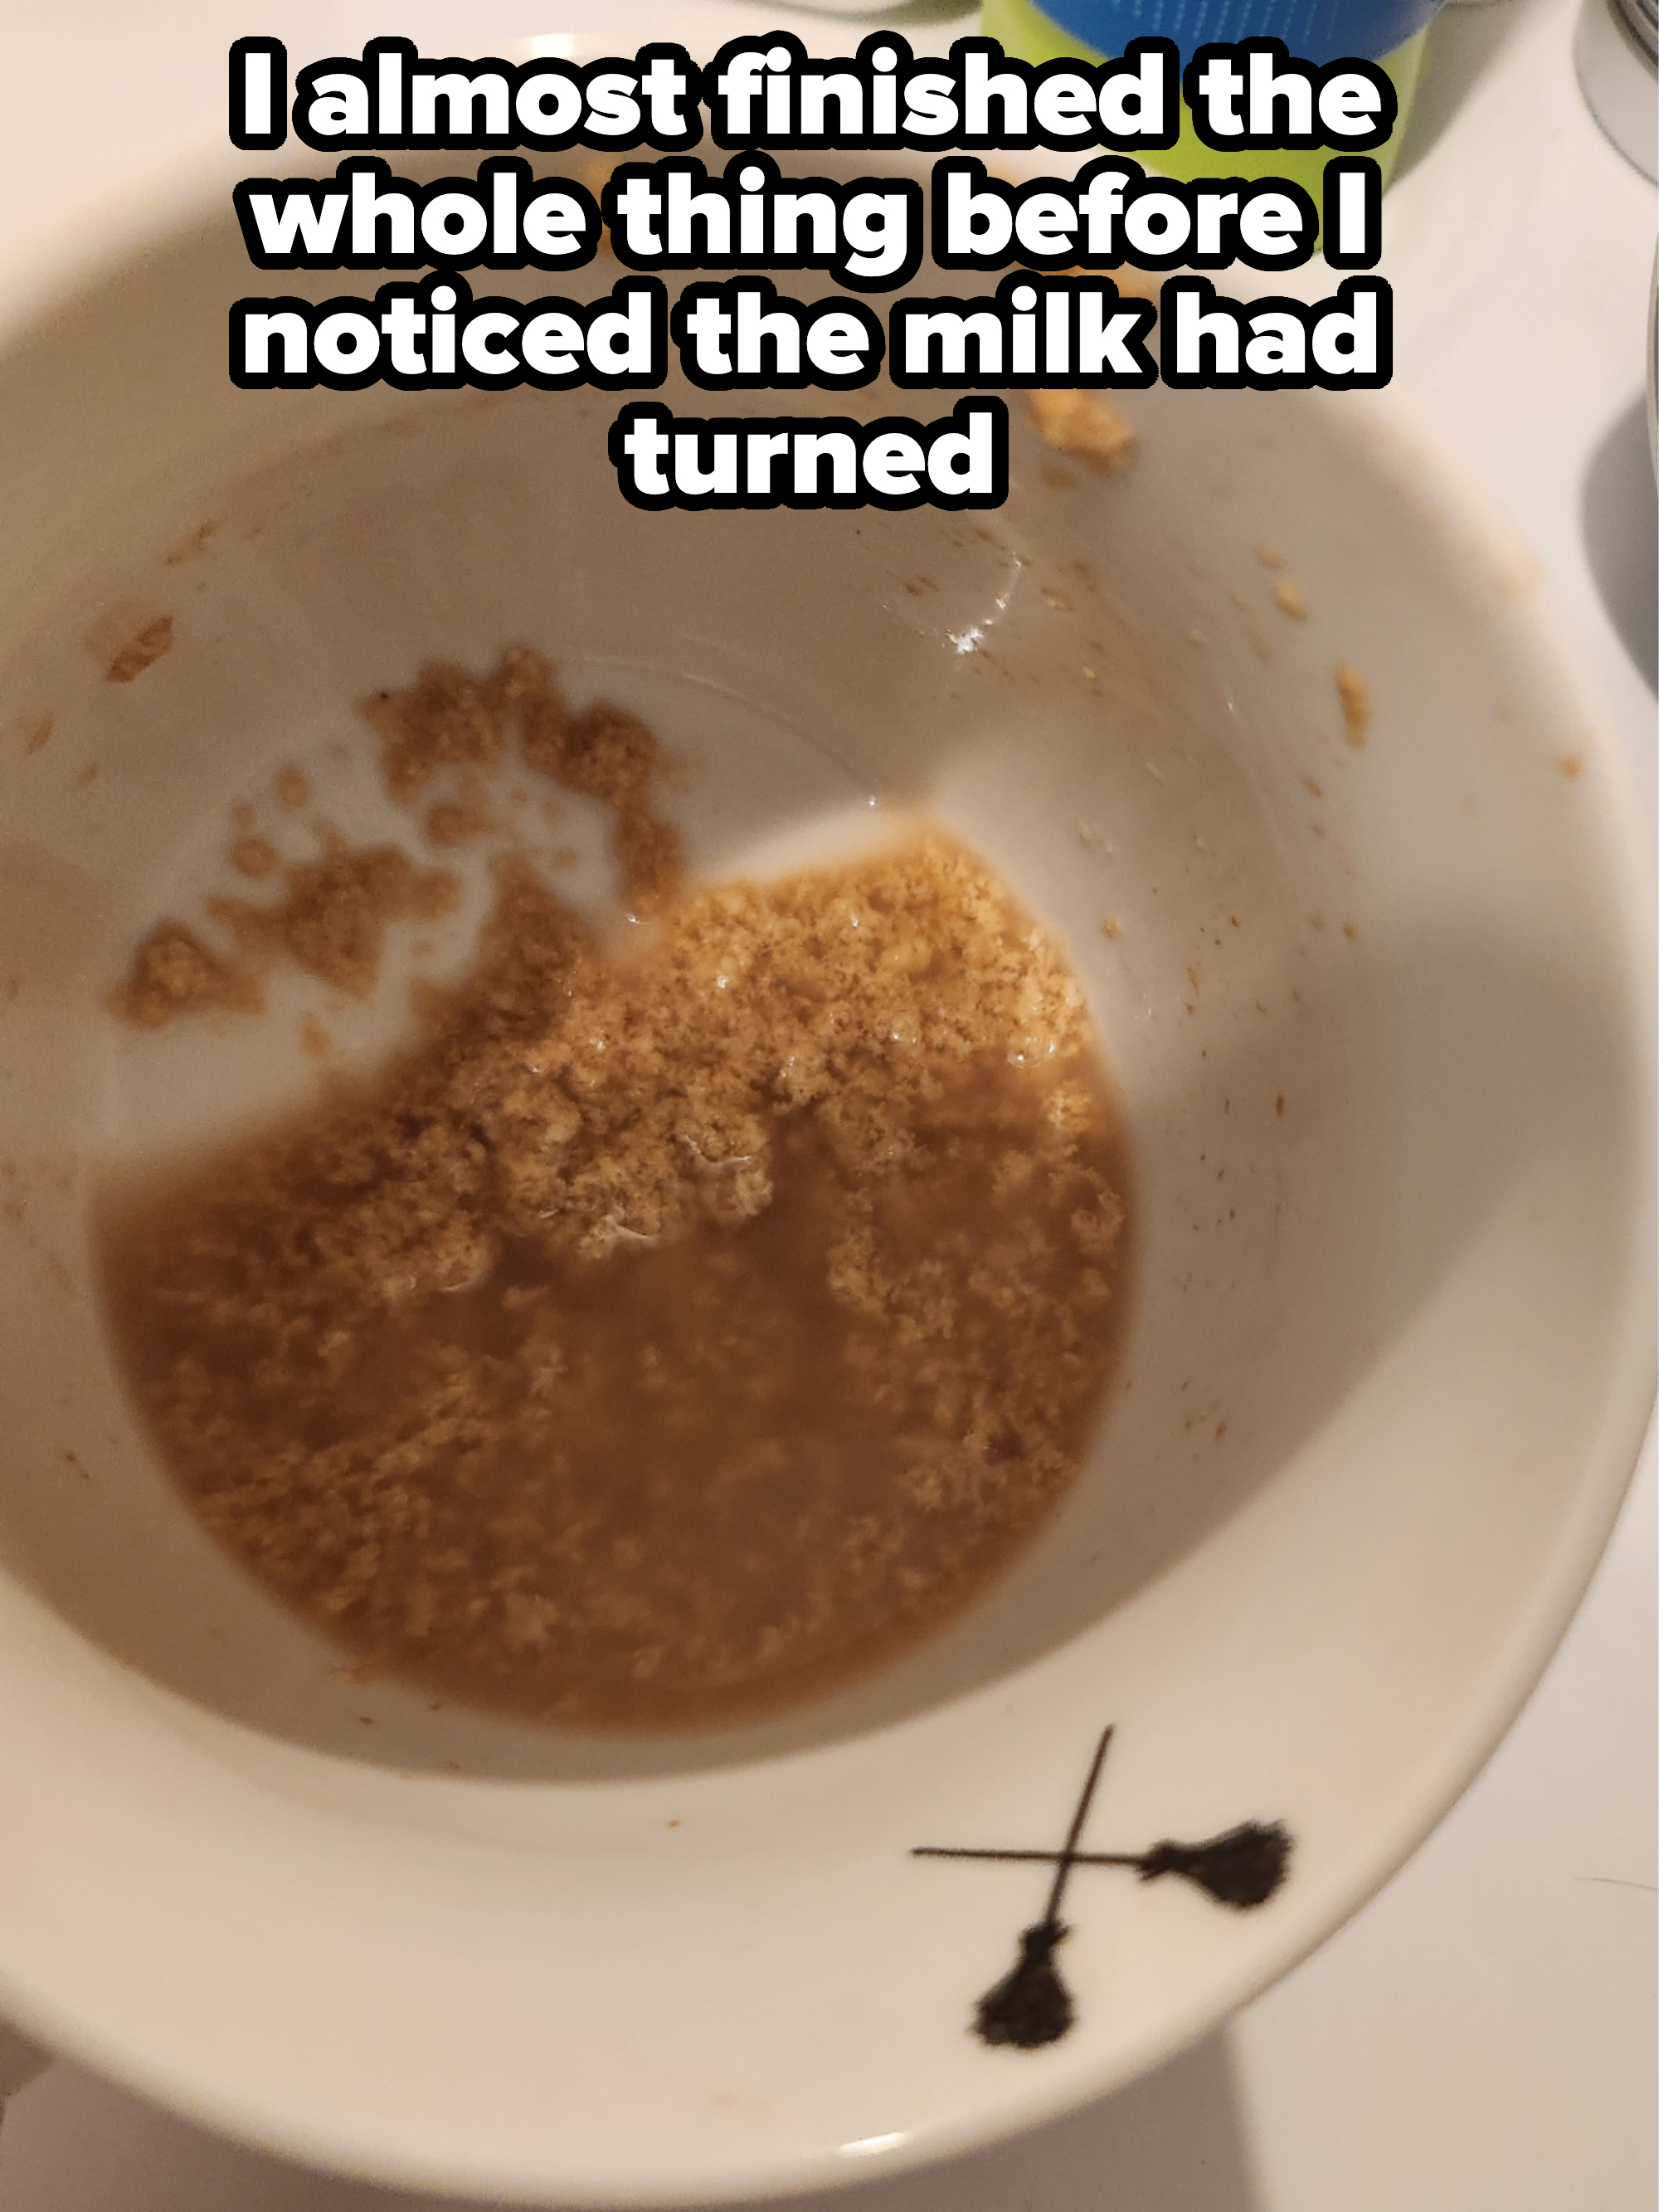 A cup with just a bit of liquid and clumps at the bottom, with caption, &quot;I almost finished the whole thing before I noticed the milk had turned&quot;